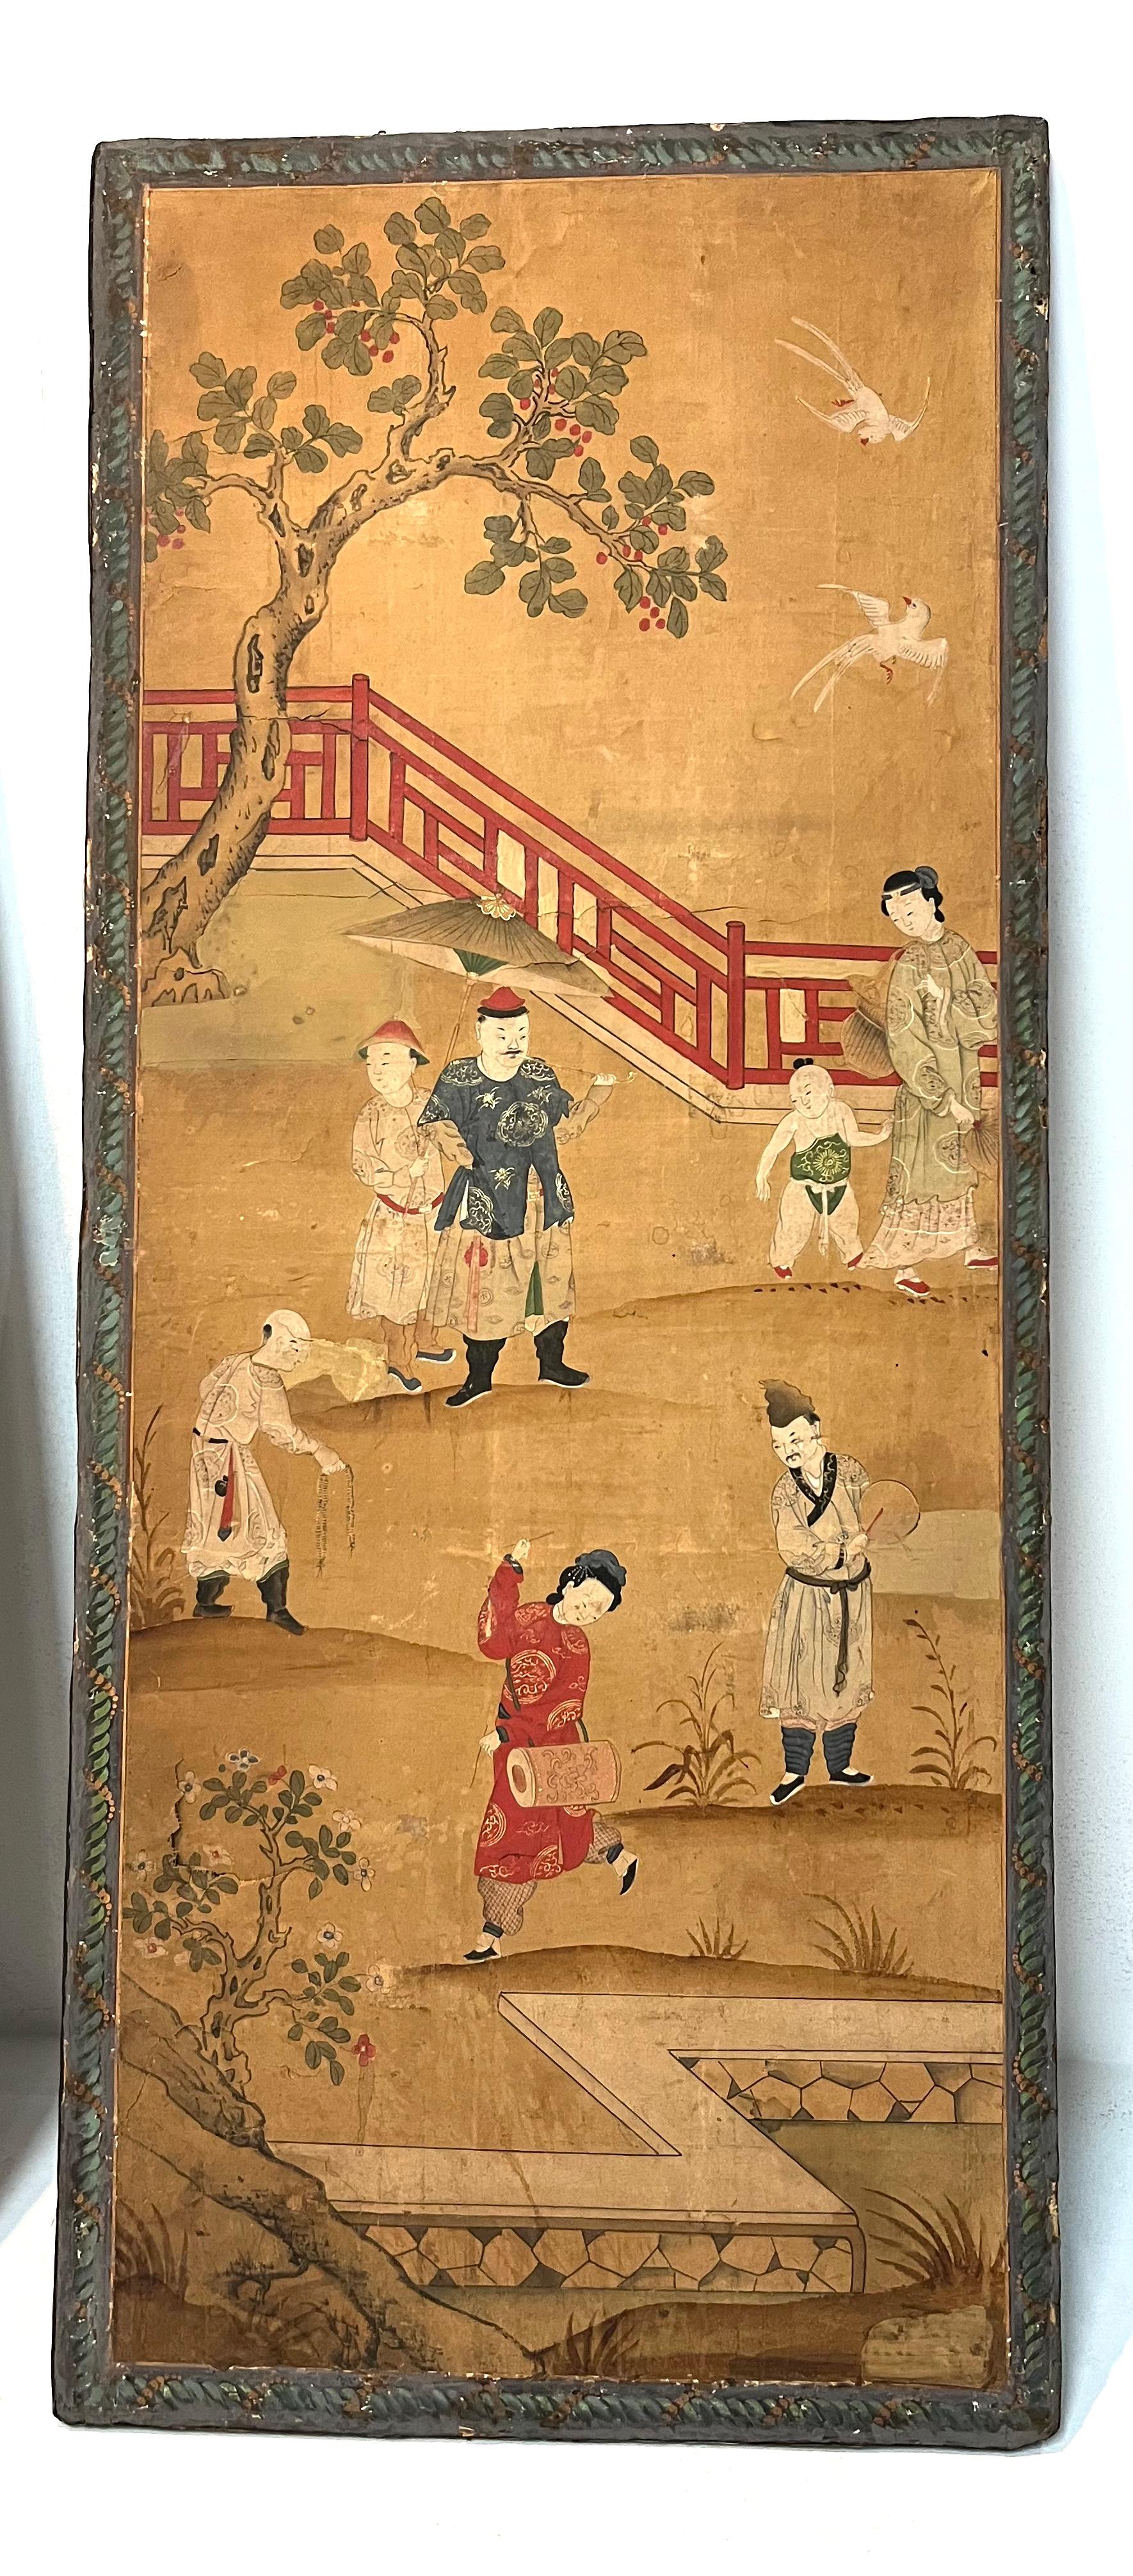 Animated scenes painted on paper.
The paper is stretched over a wooden frame , 
A fabric is stretch over the back of the painting on he wood frame.
Second part of 19th century.
Very good quality of art.